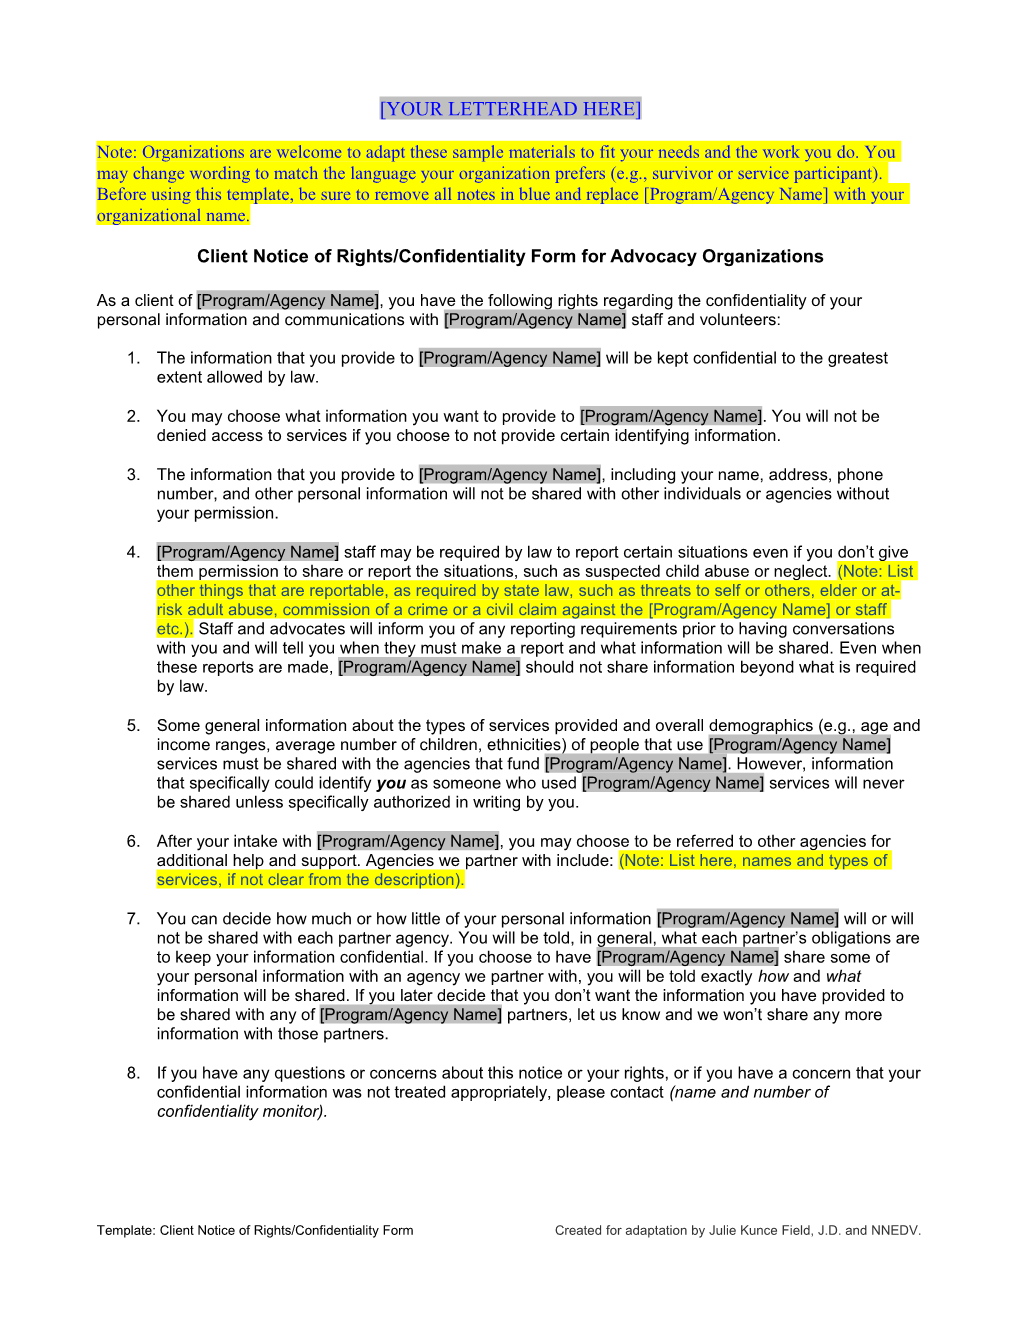 Template: Client Notice of Rights Form/Confidentiality